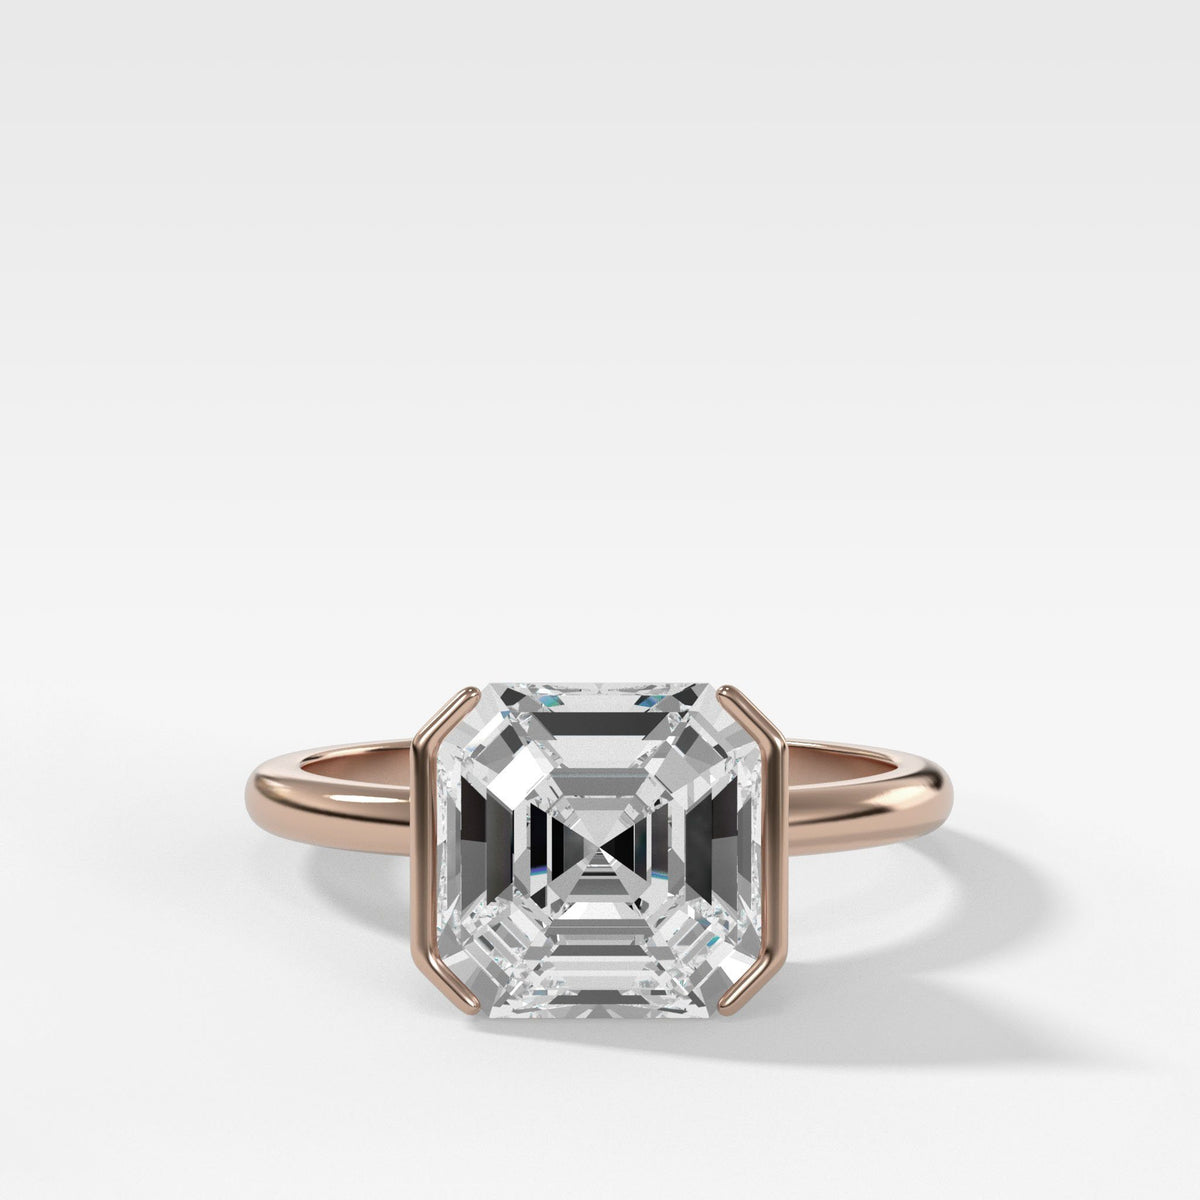 Half Bezel Solitaire Engagement Ring With Asscher Cut by Good Stone in Rose Gold